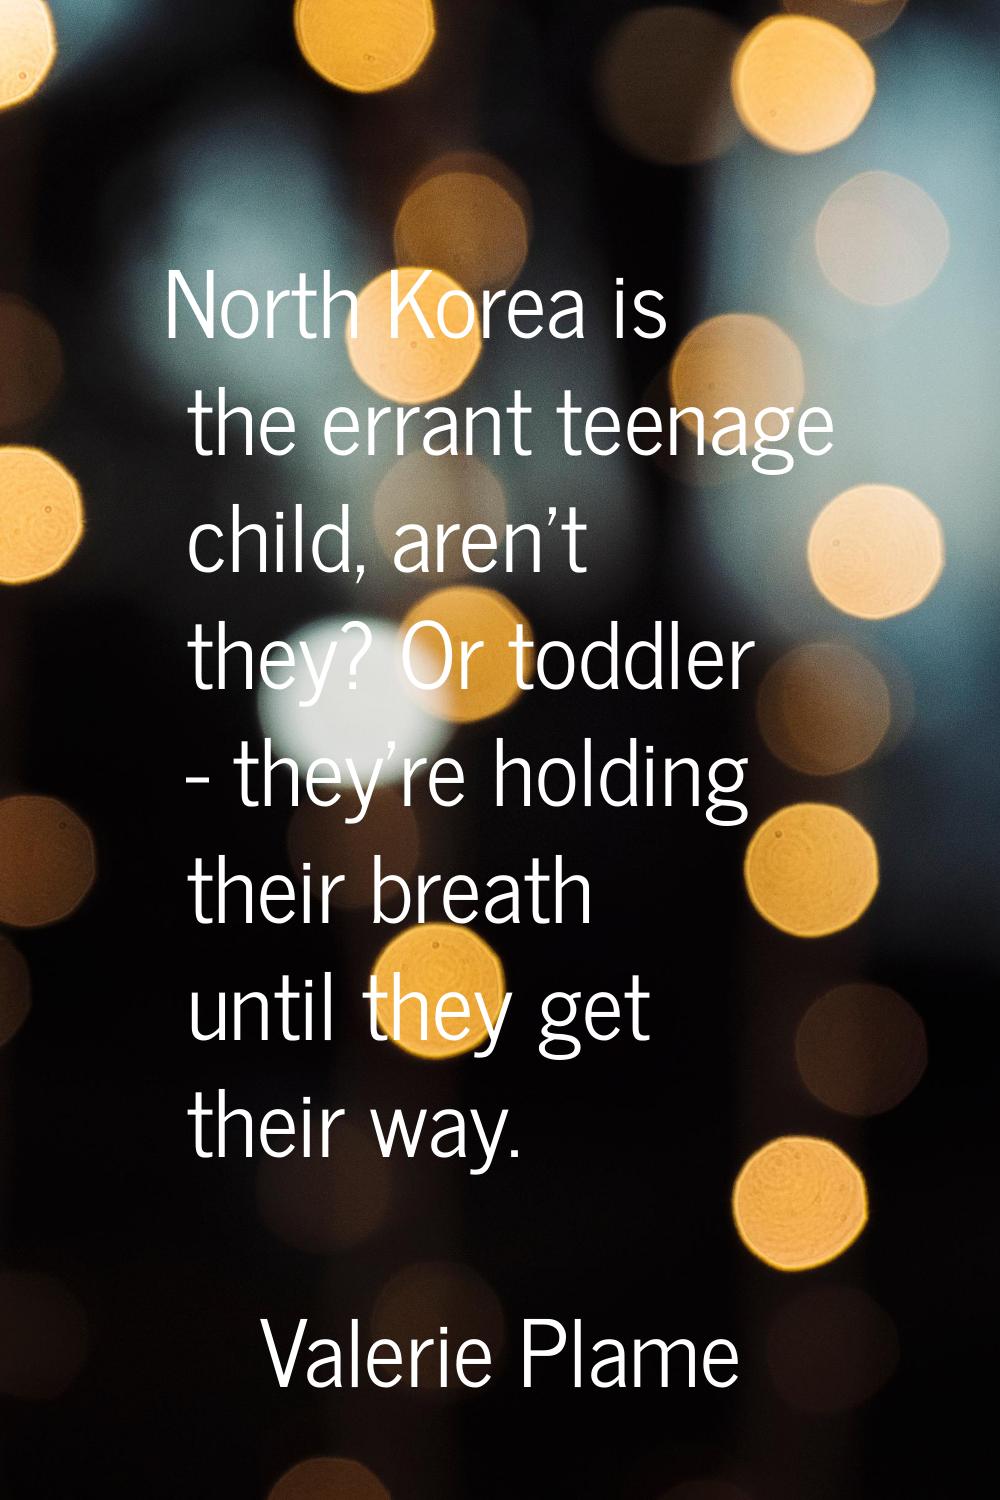 North Korea is the errant teenage child, aren't they? Or toddler - they're holding their breath unt